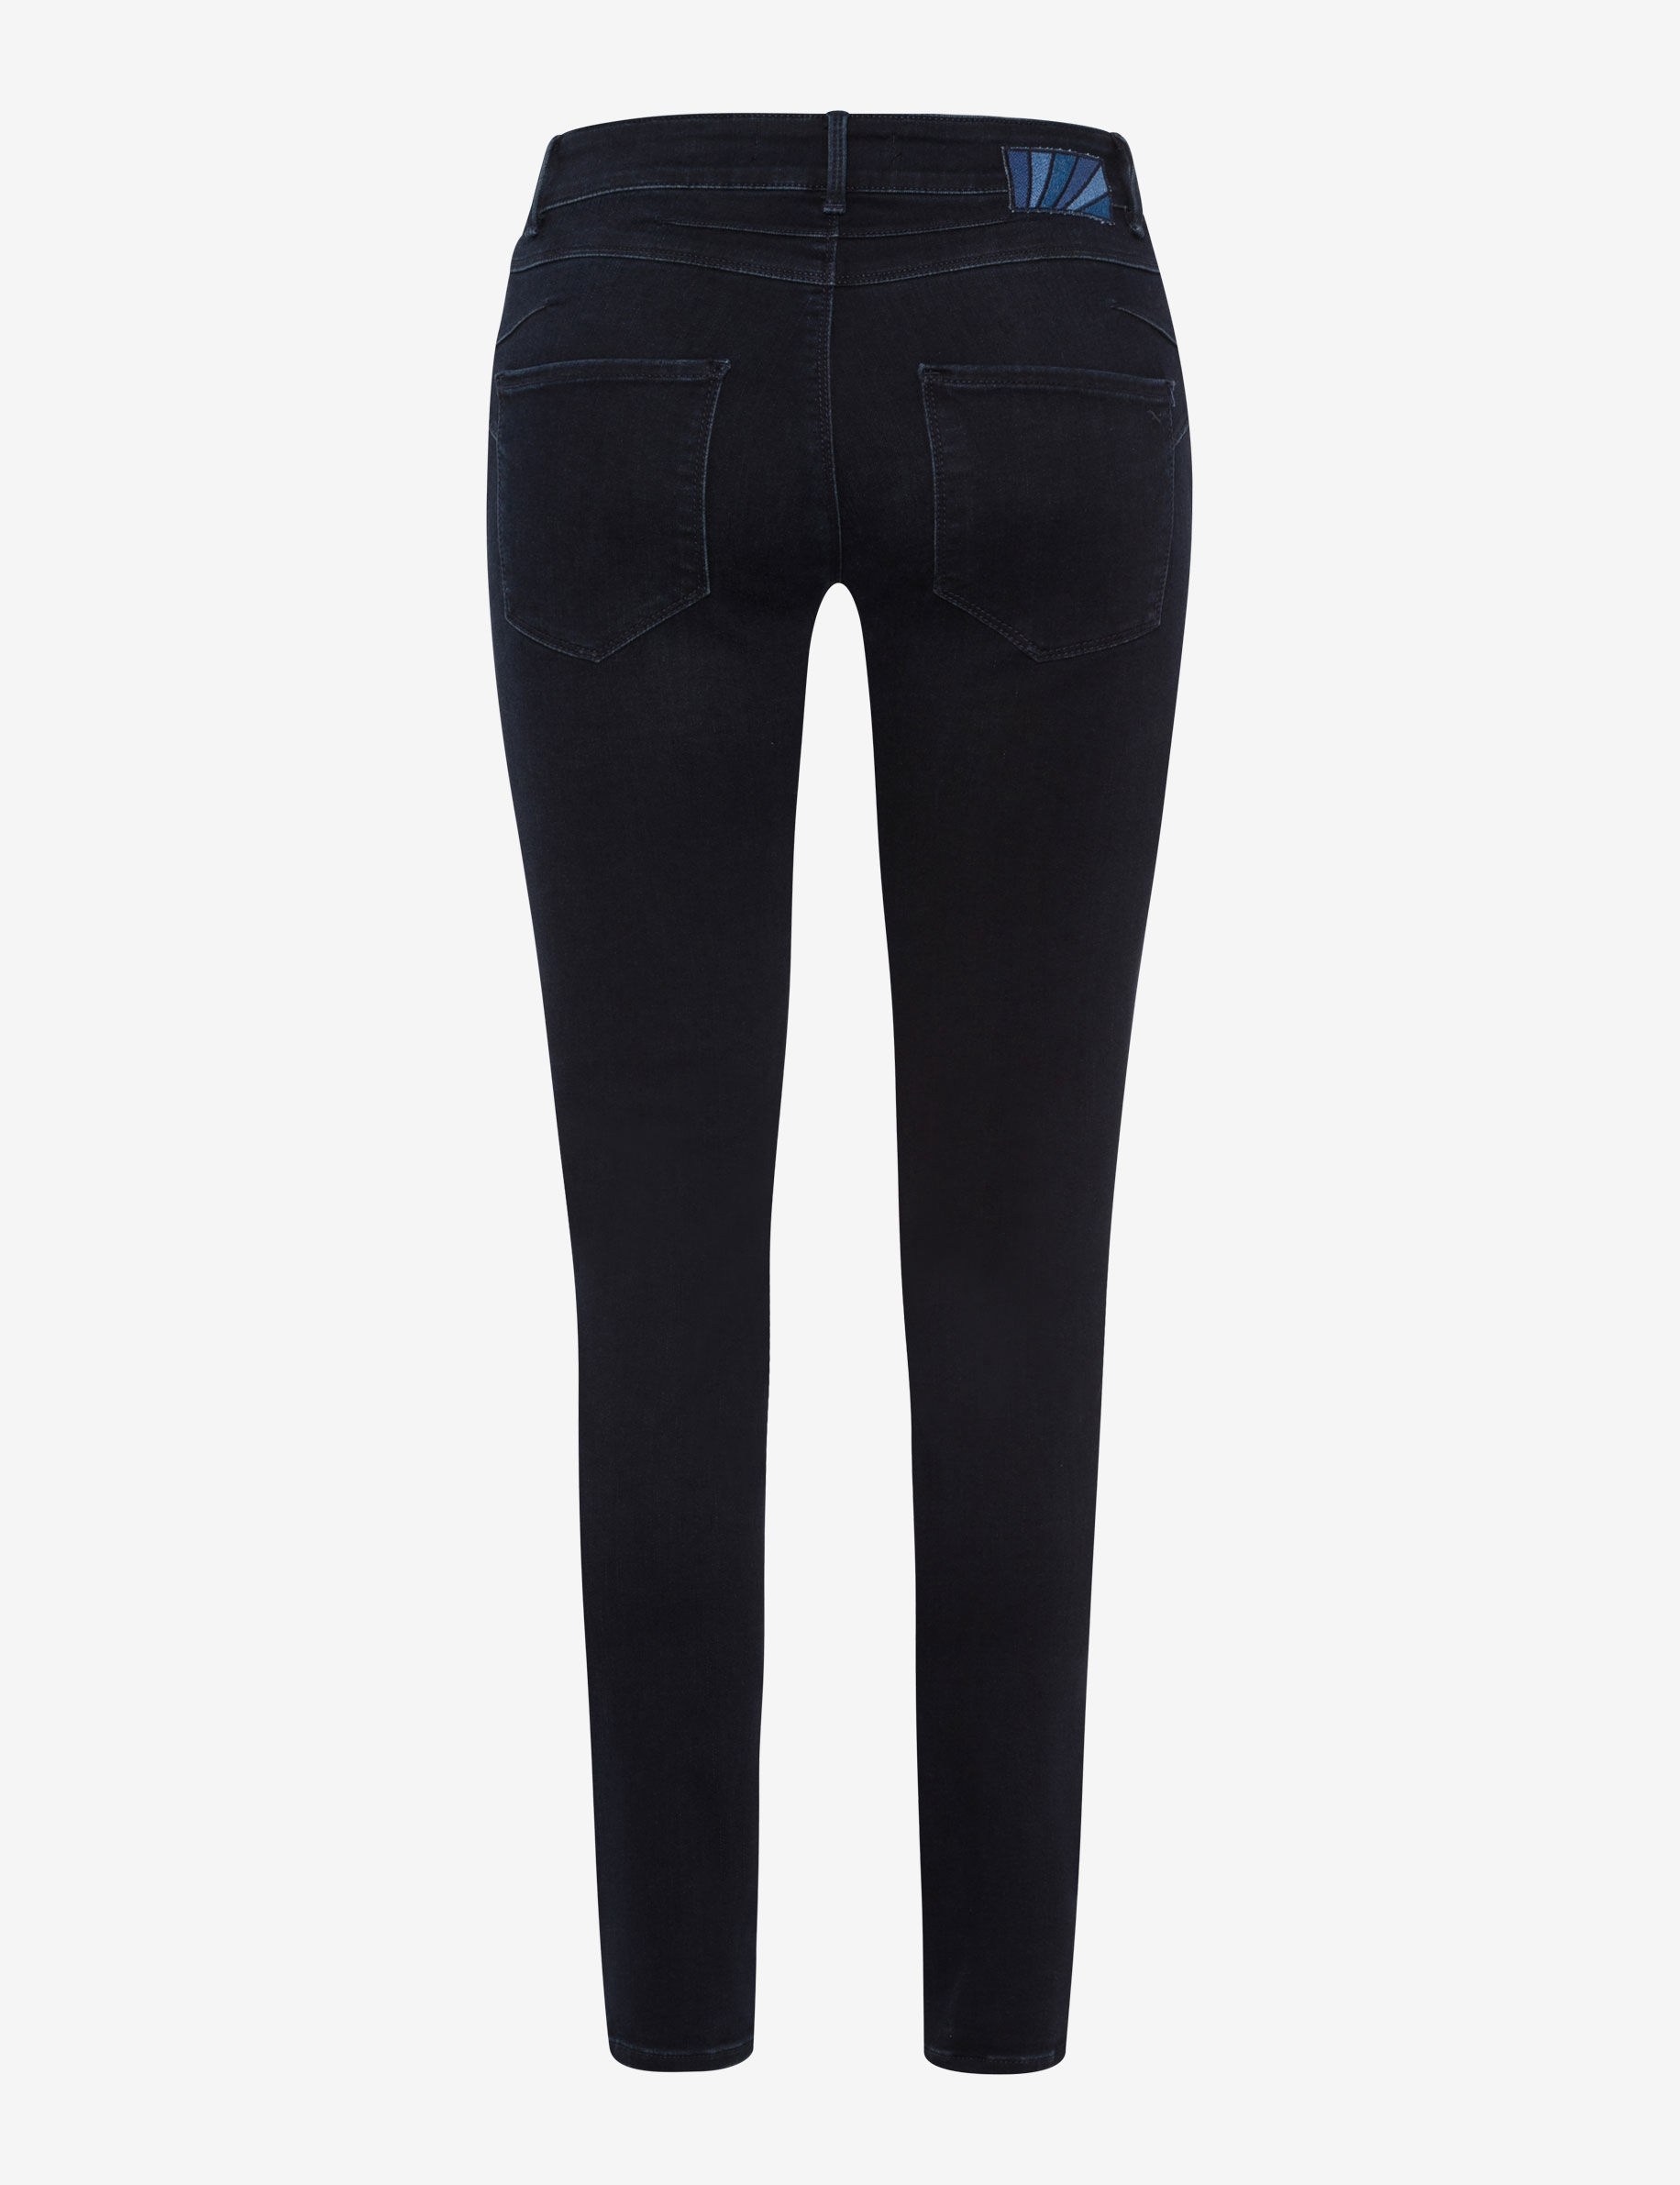 Women Style ANA USED DARK BLUE Skinny Fit Stand-alone rear view